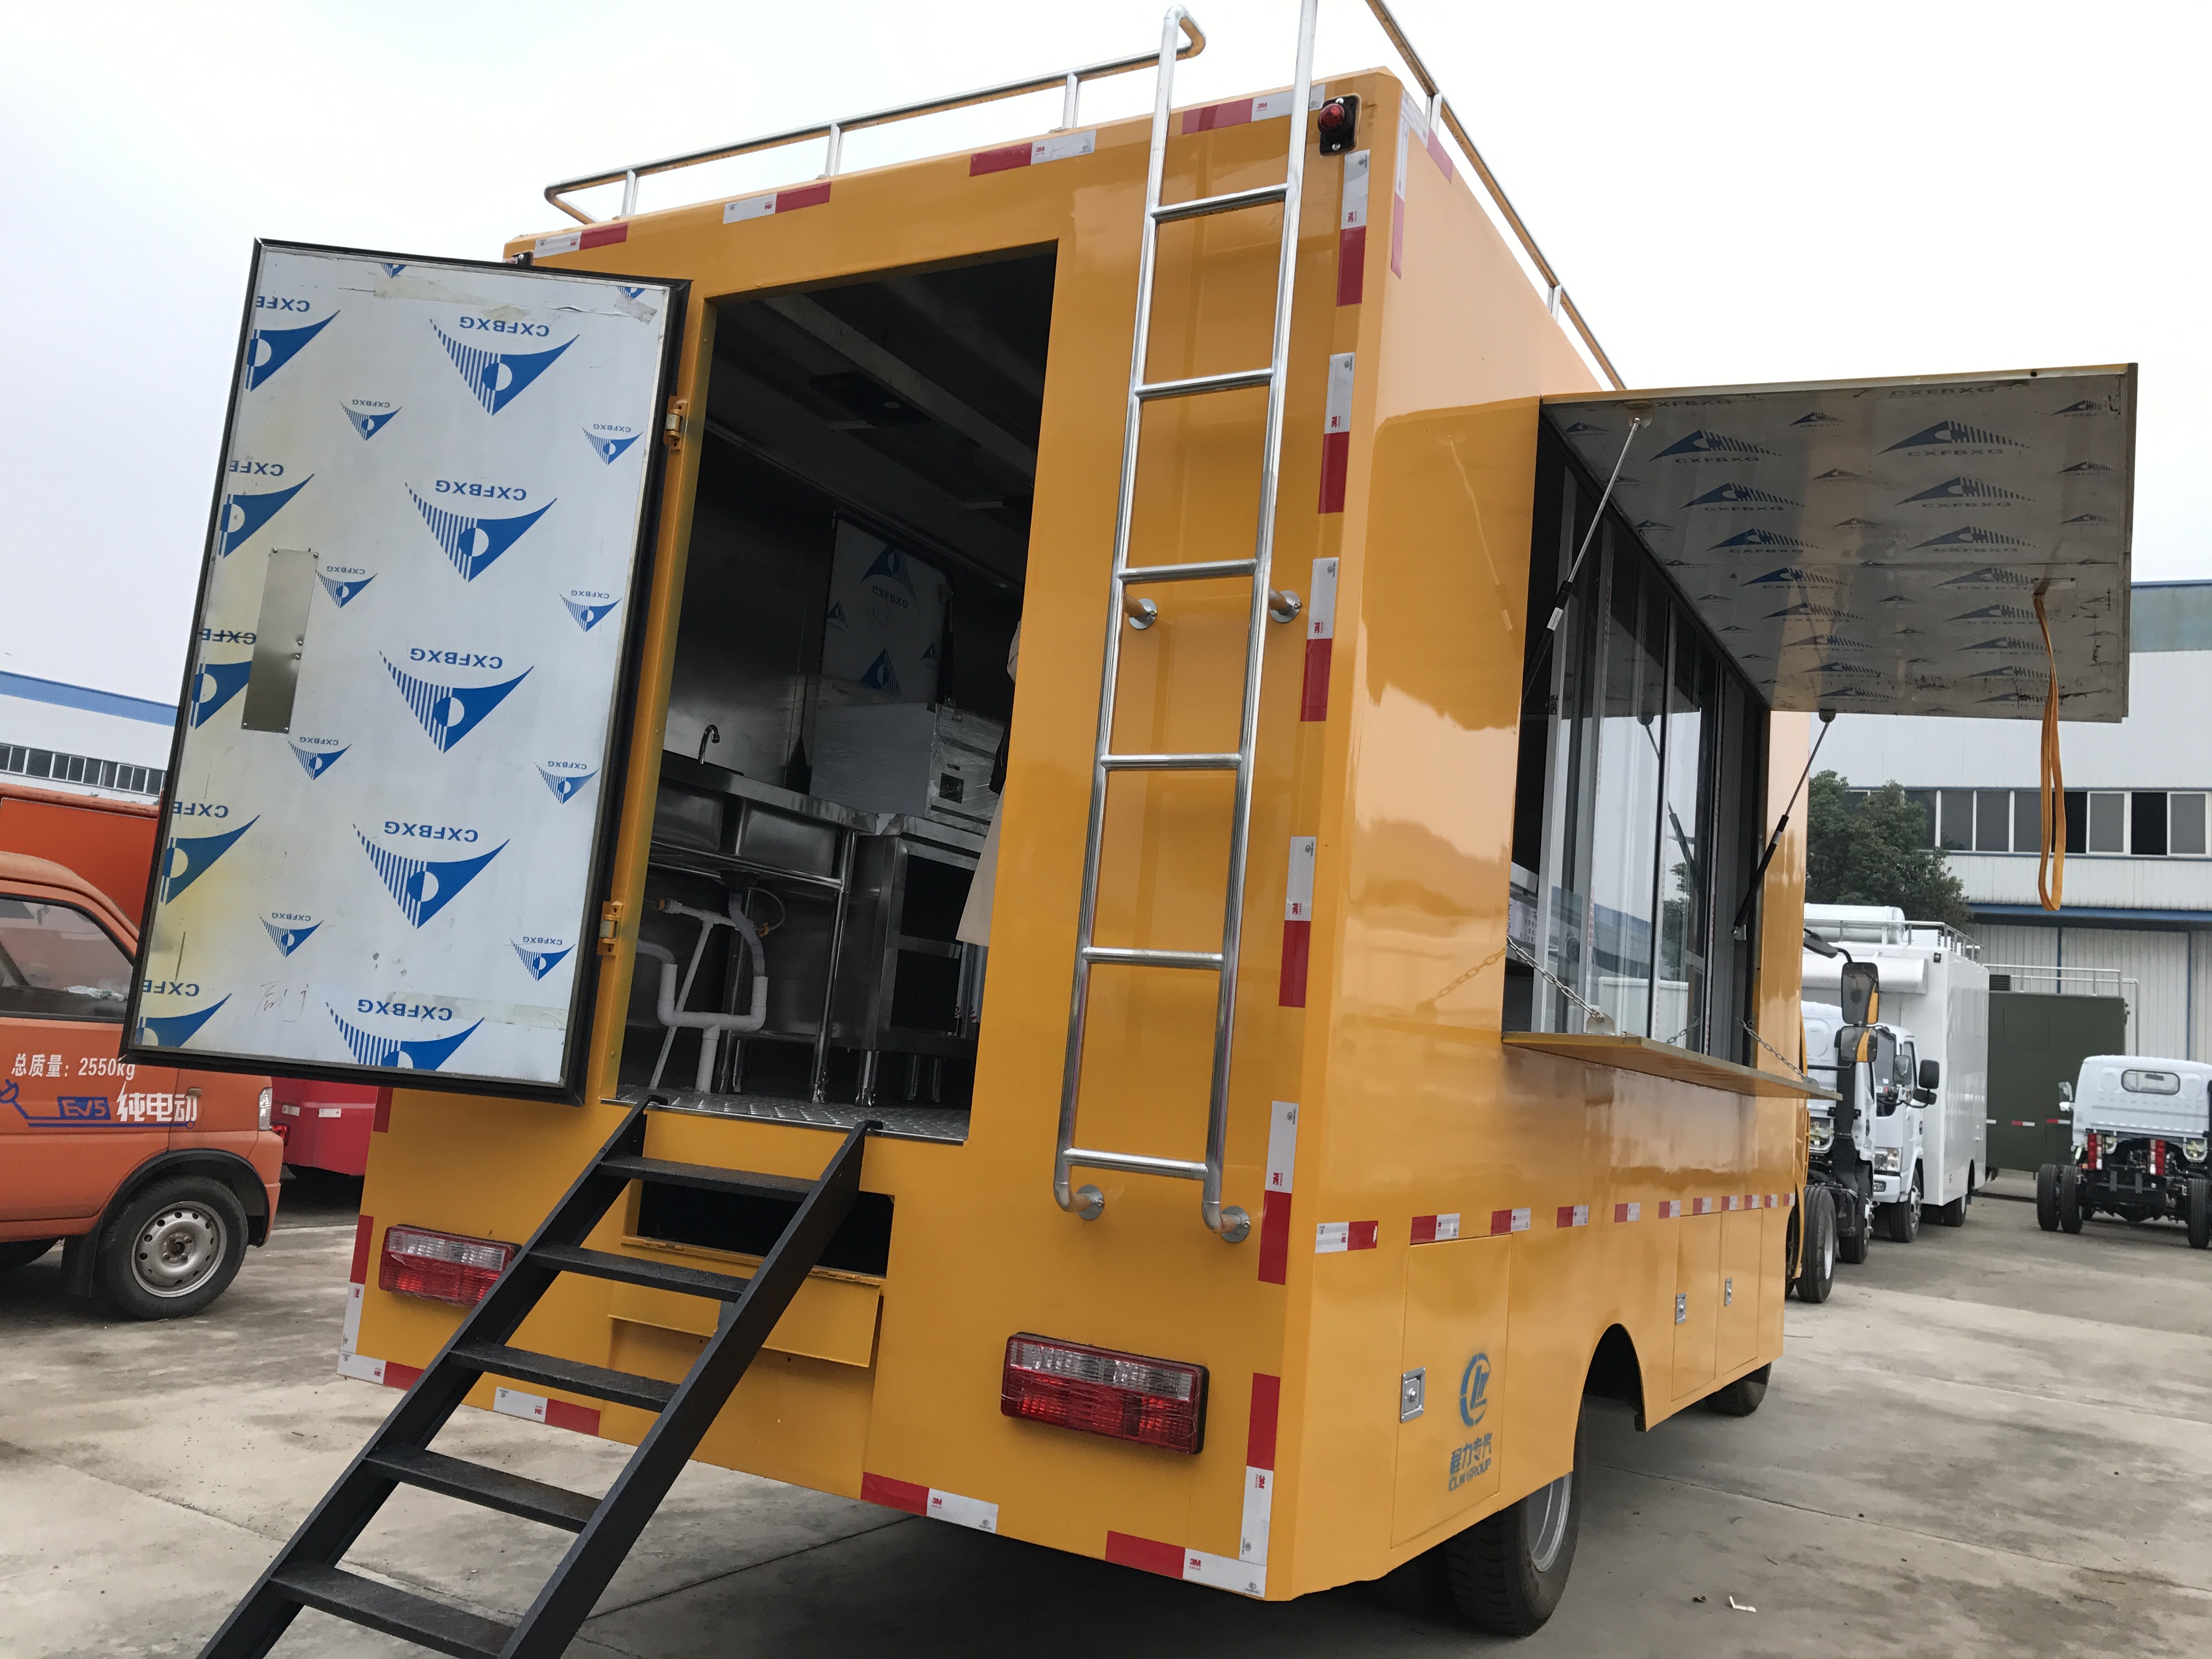 2019 New Design Mobile Street Snack Cart Ice Cream Food Truck for Sale